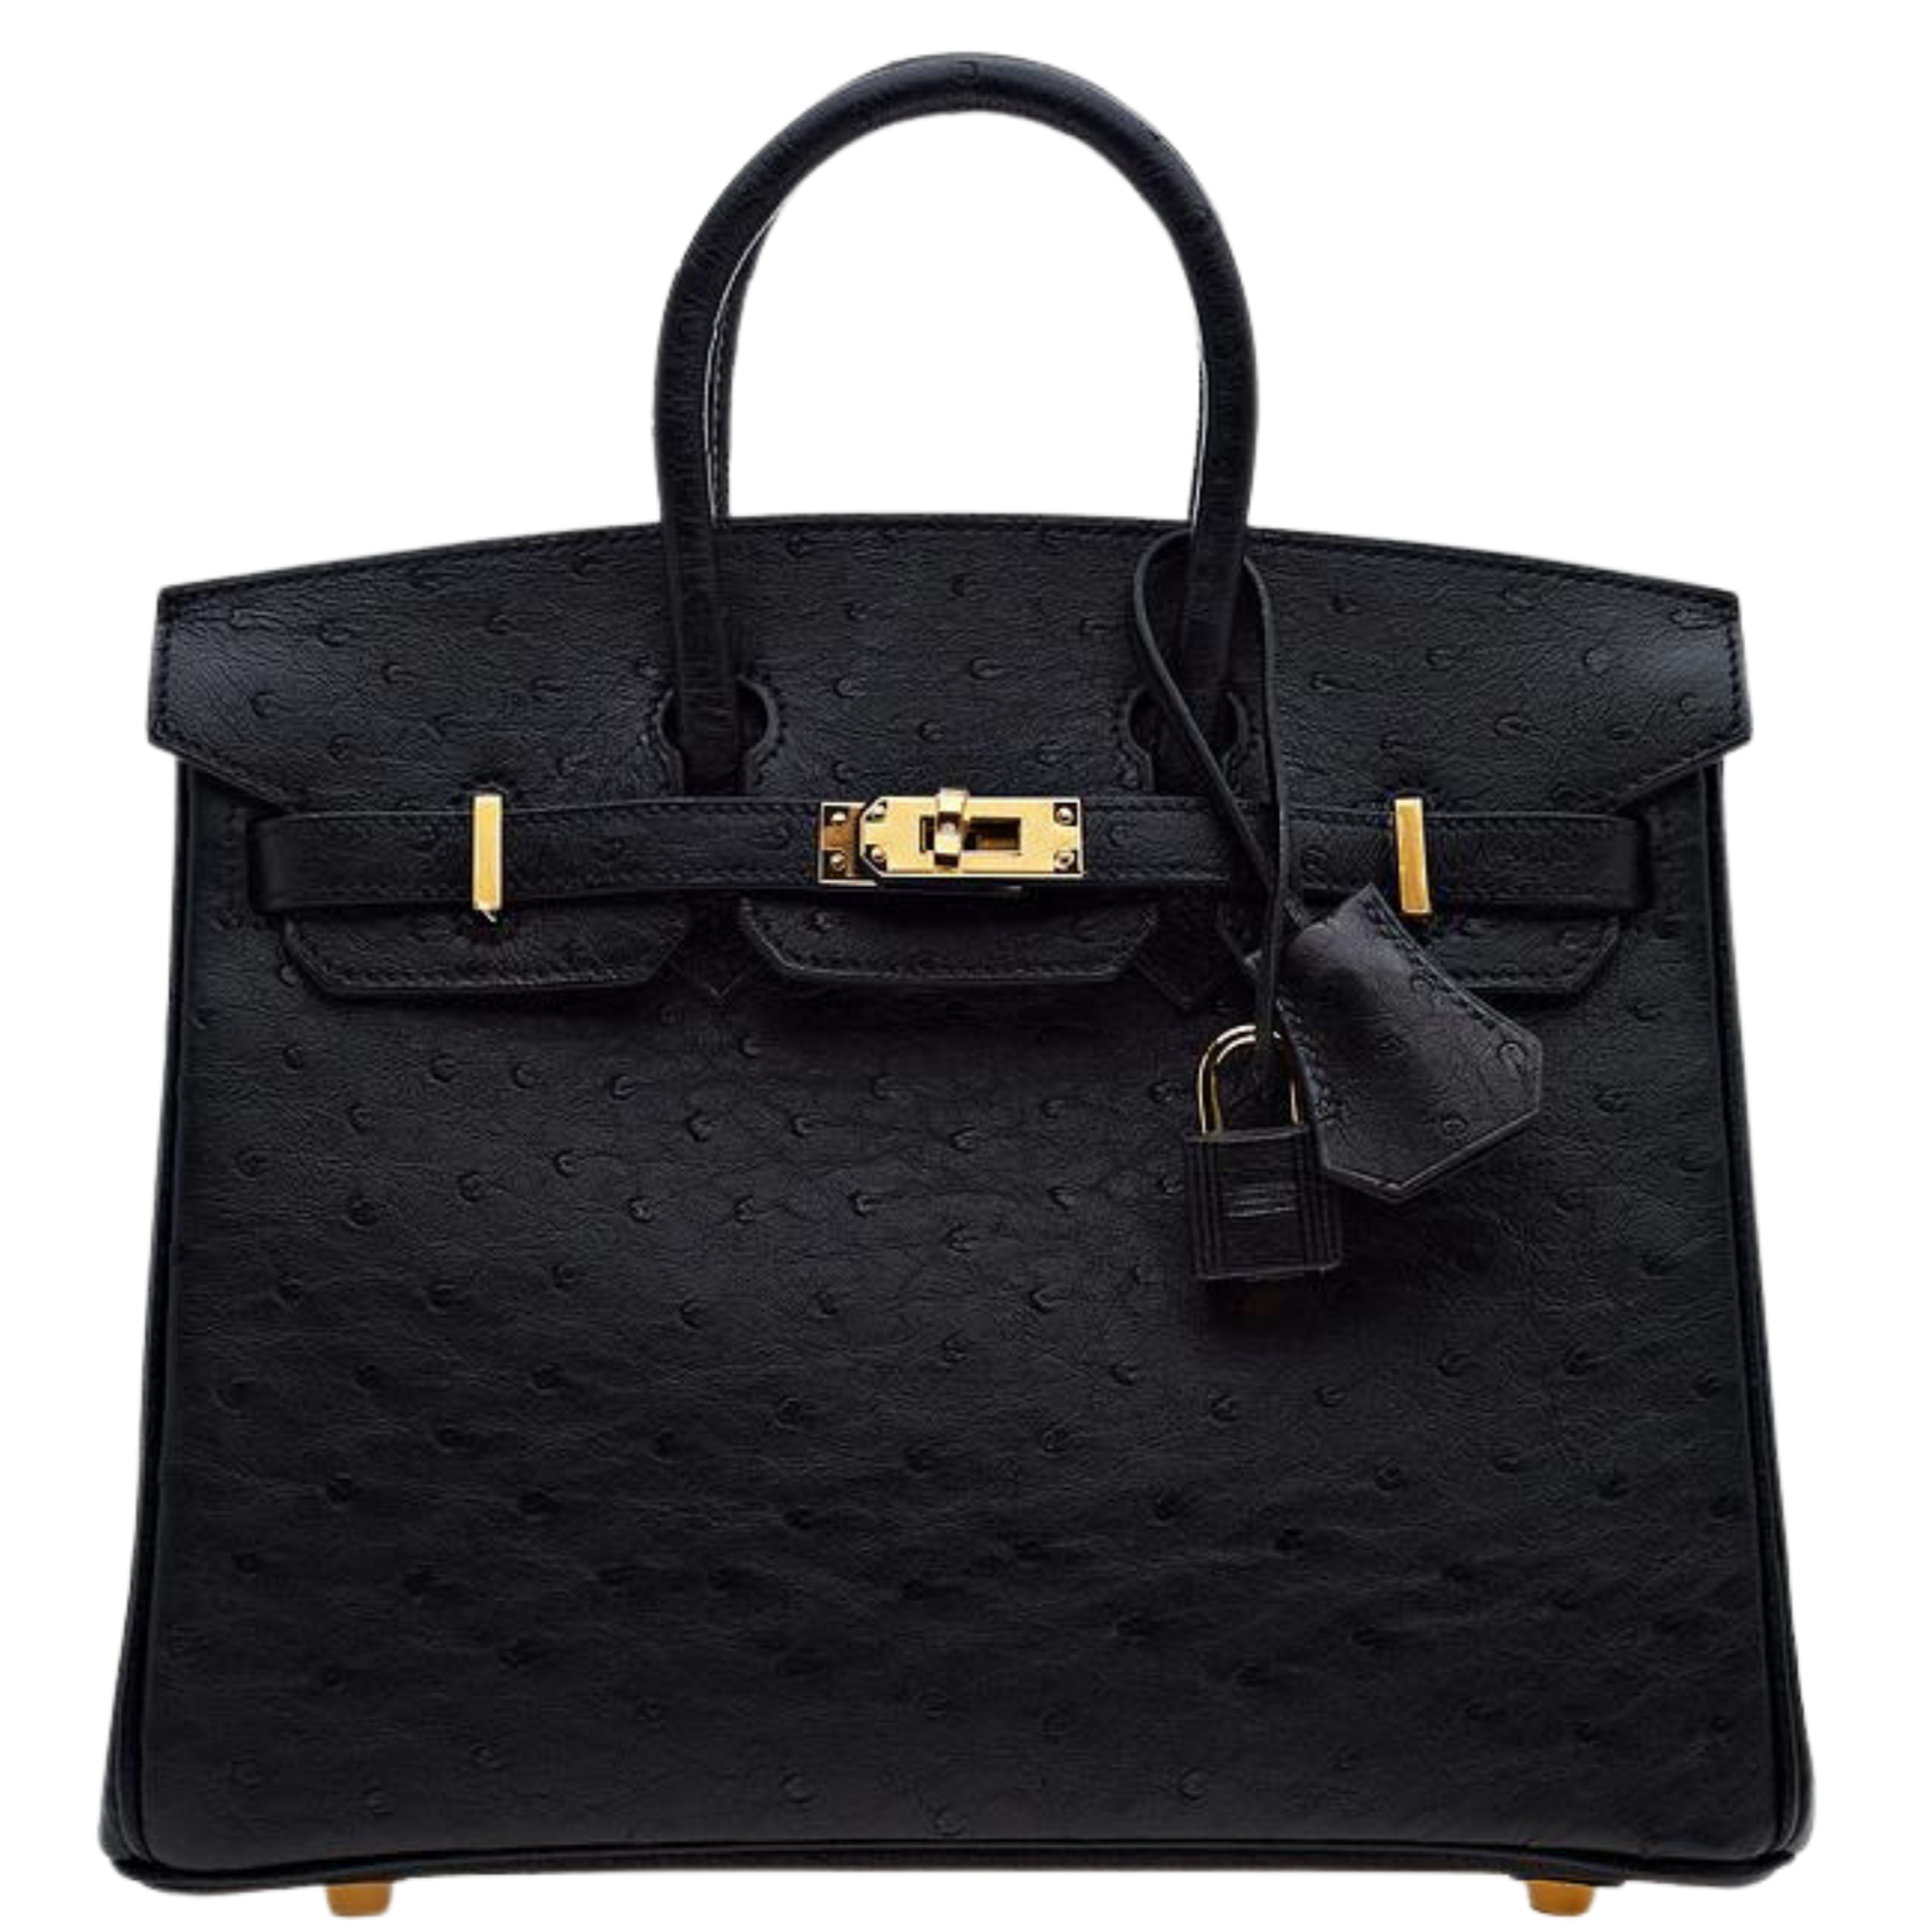 hermes ostrich leather